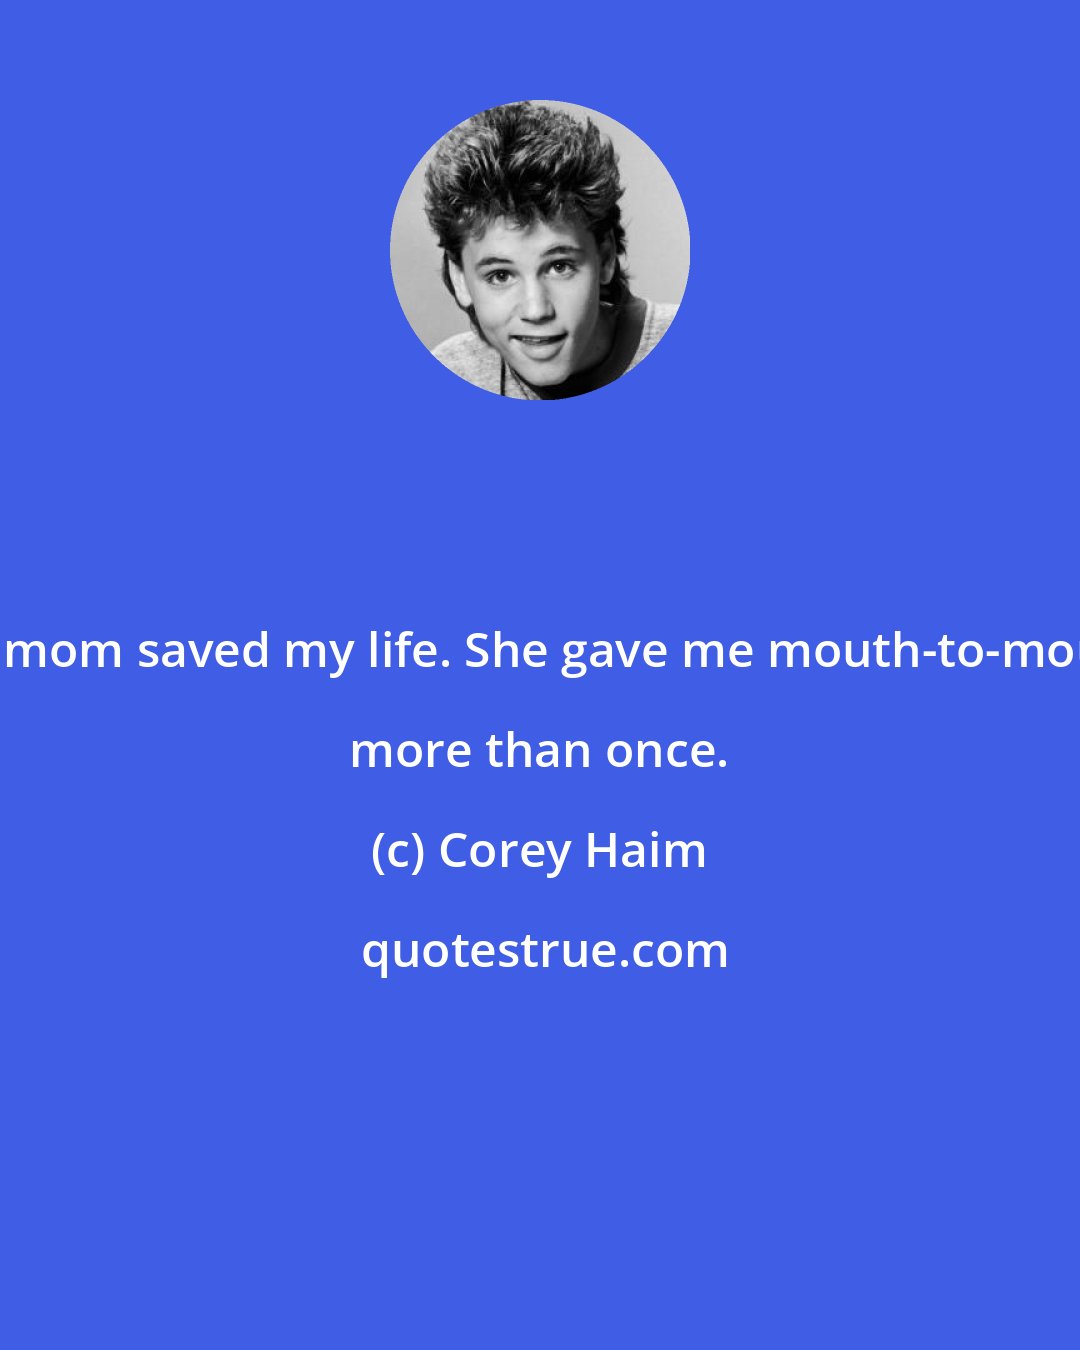 Corey Haim: My mom saved my life. She gave me mouth-to-mouth more than once.